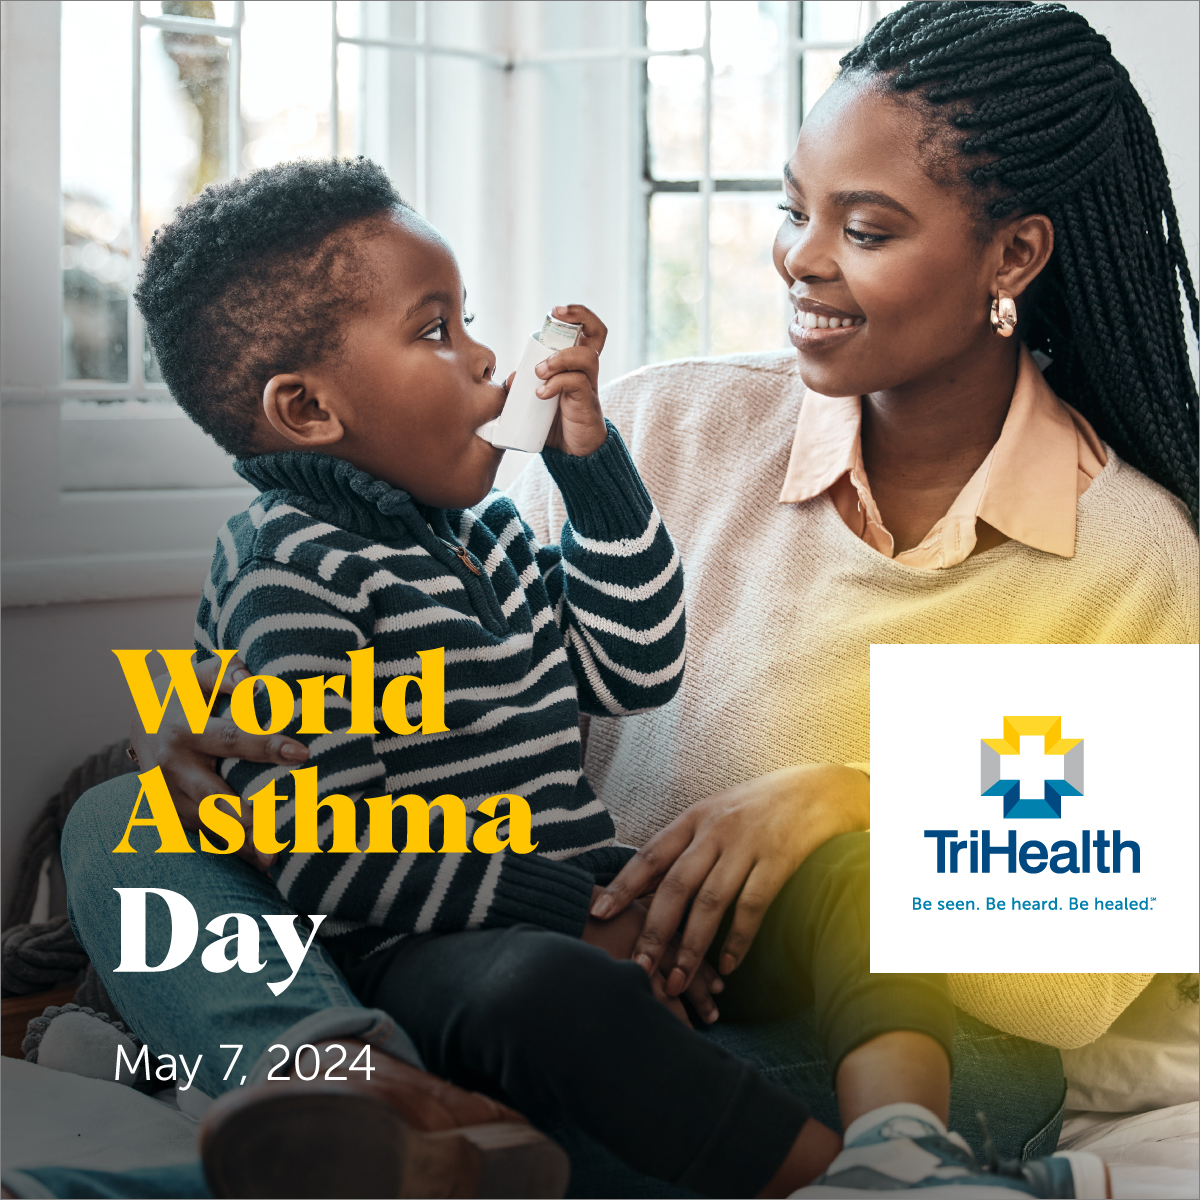 Today is World Asthma Day! Asthma is very common in the US, with over 27 million people affected by it - including over 4.5 million children, making it a leading chronic illness amongst kids. Looking to address asthma? Contact a TriHealth pediatrician! bit.ly/3MDzsmb